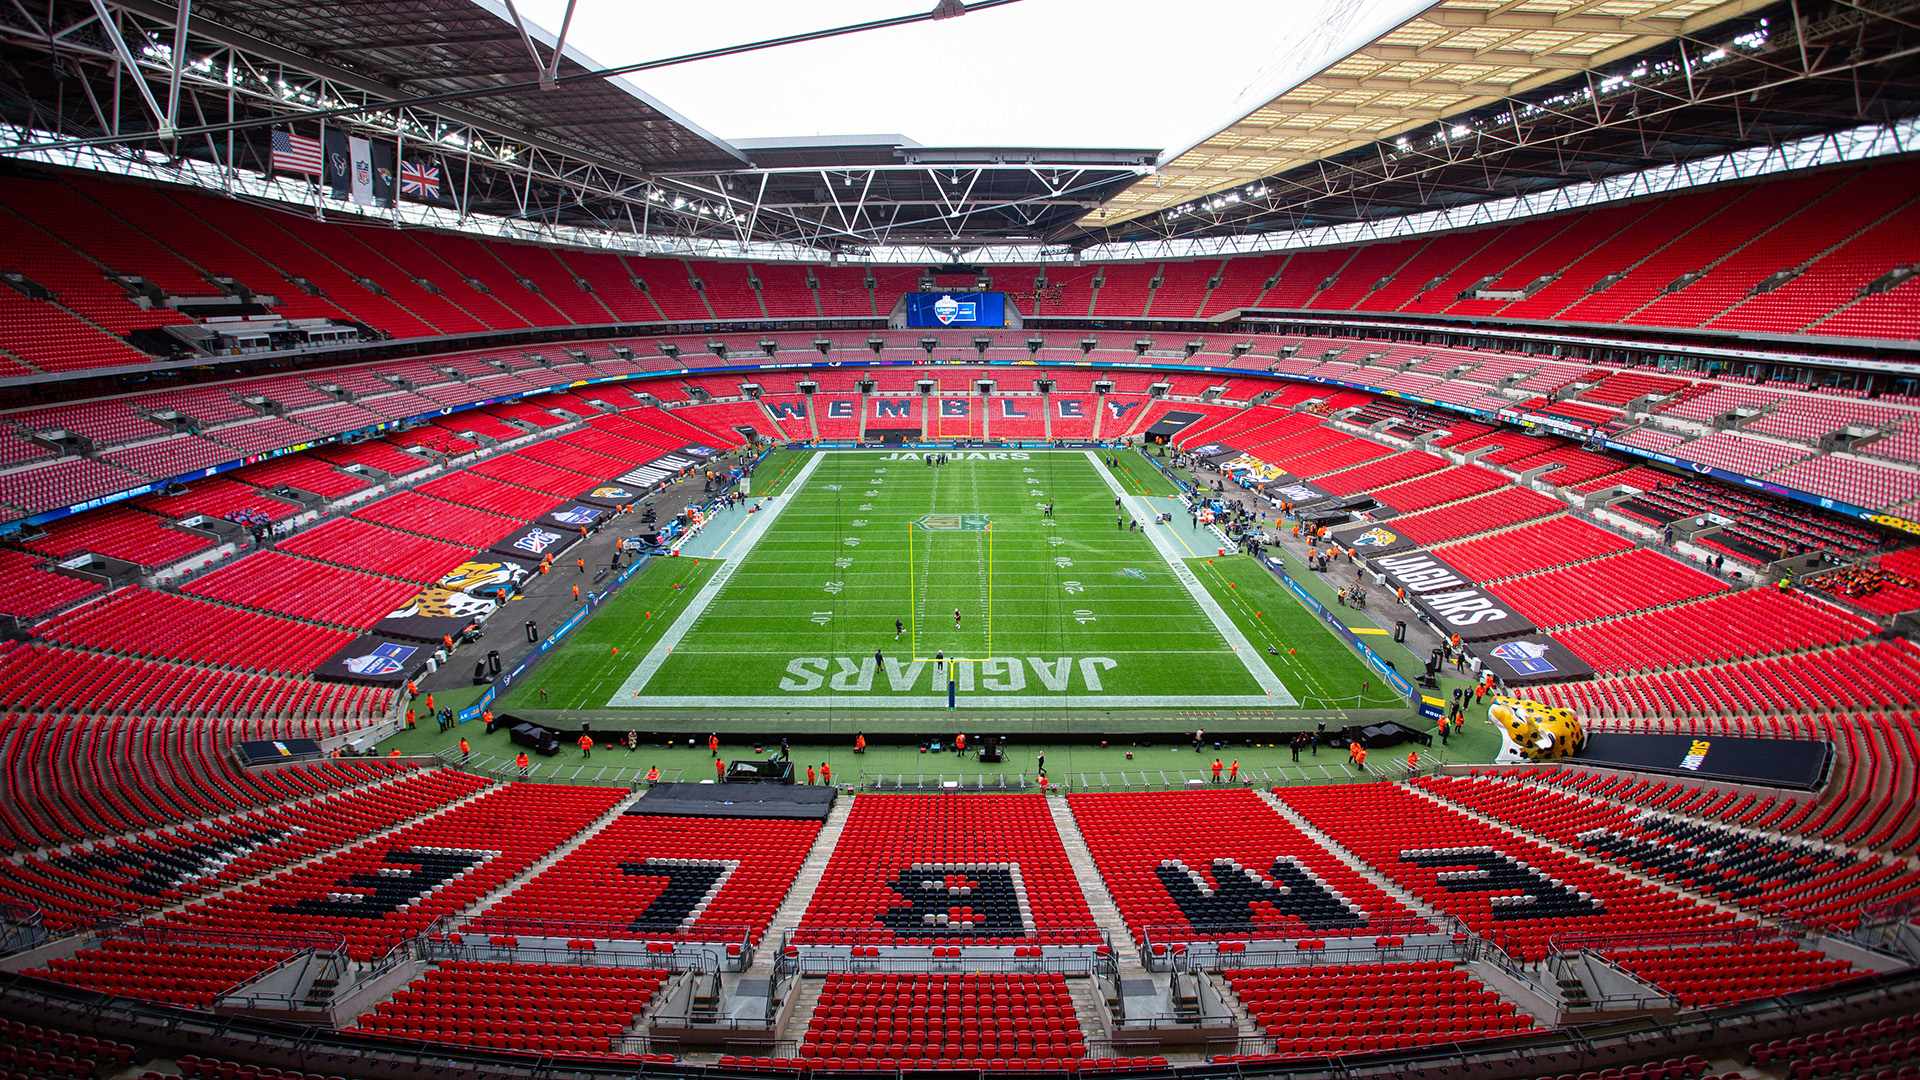 Wembley Stadium before the NFL game between the Houston Texans and the Jacksonville Jaguars in 2019 in London, England.